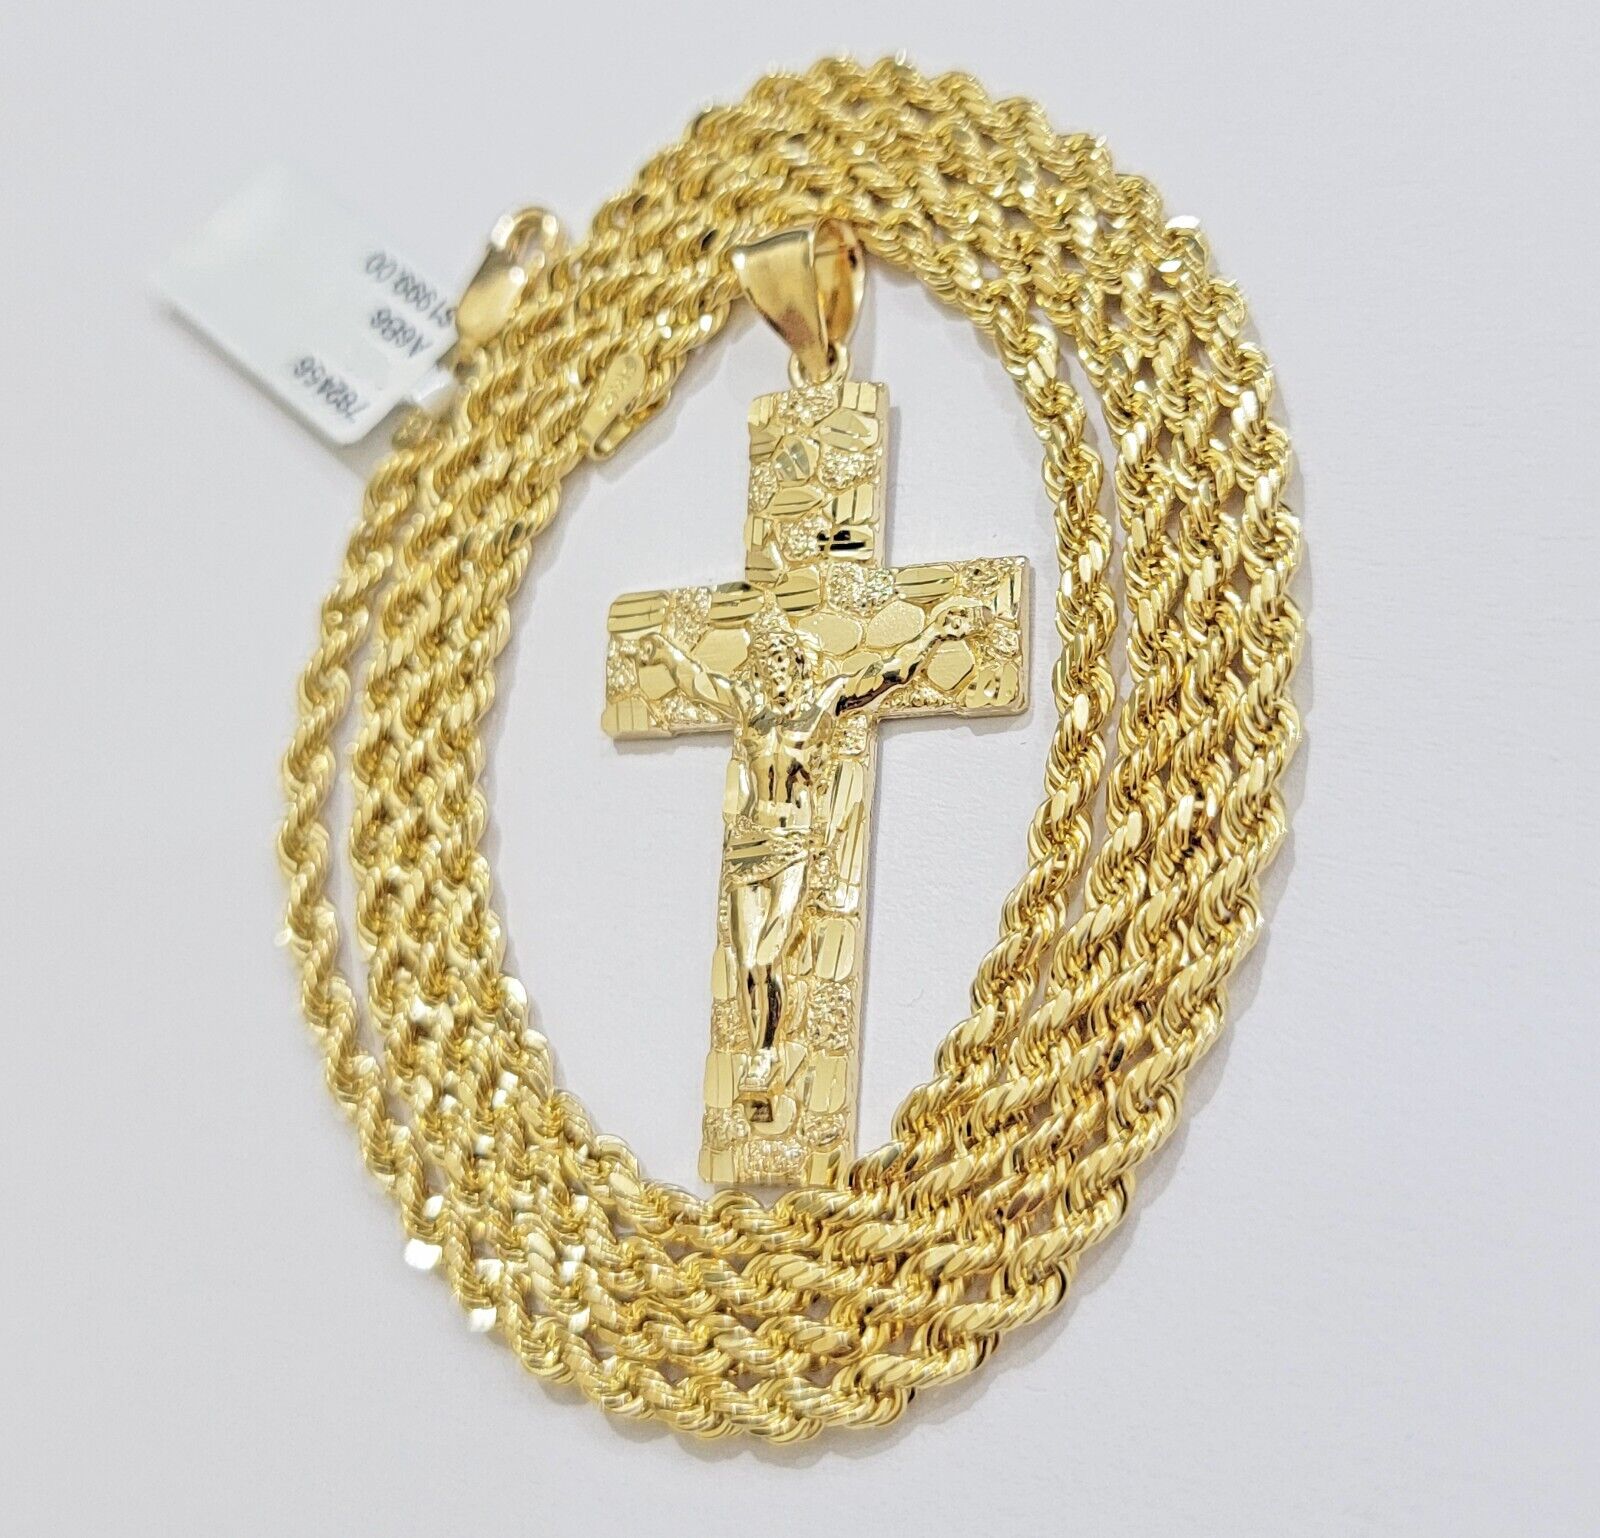 10k Gold Rope Chain Nugget Cross Charm Pendant Set 18-28 inch 3mm Necklace, REAL